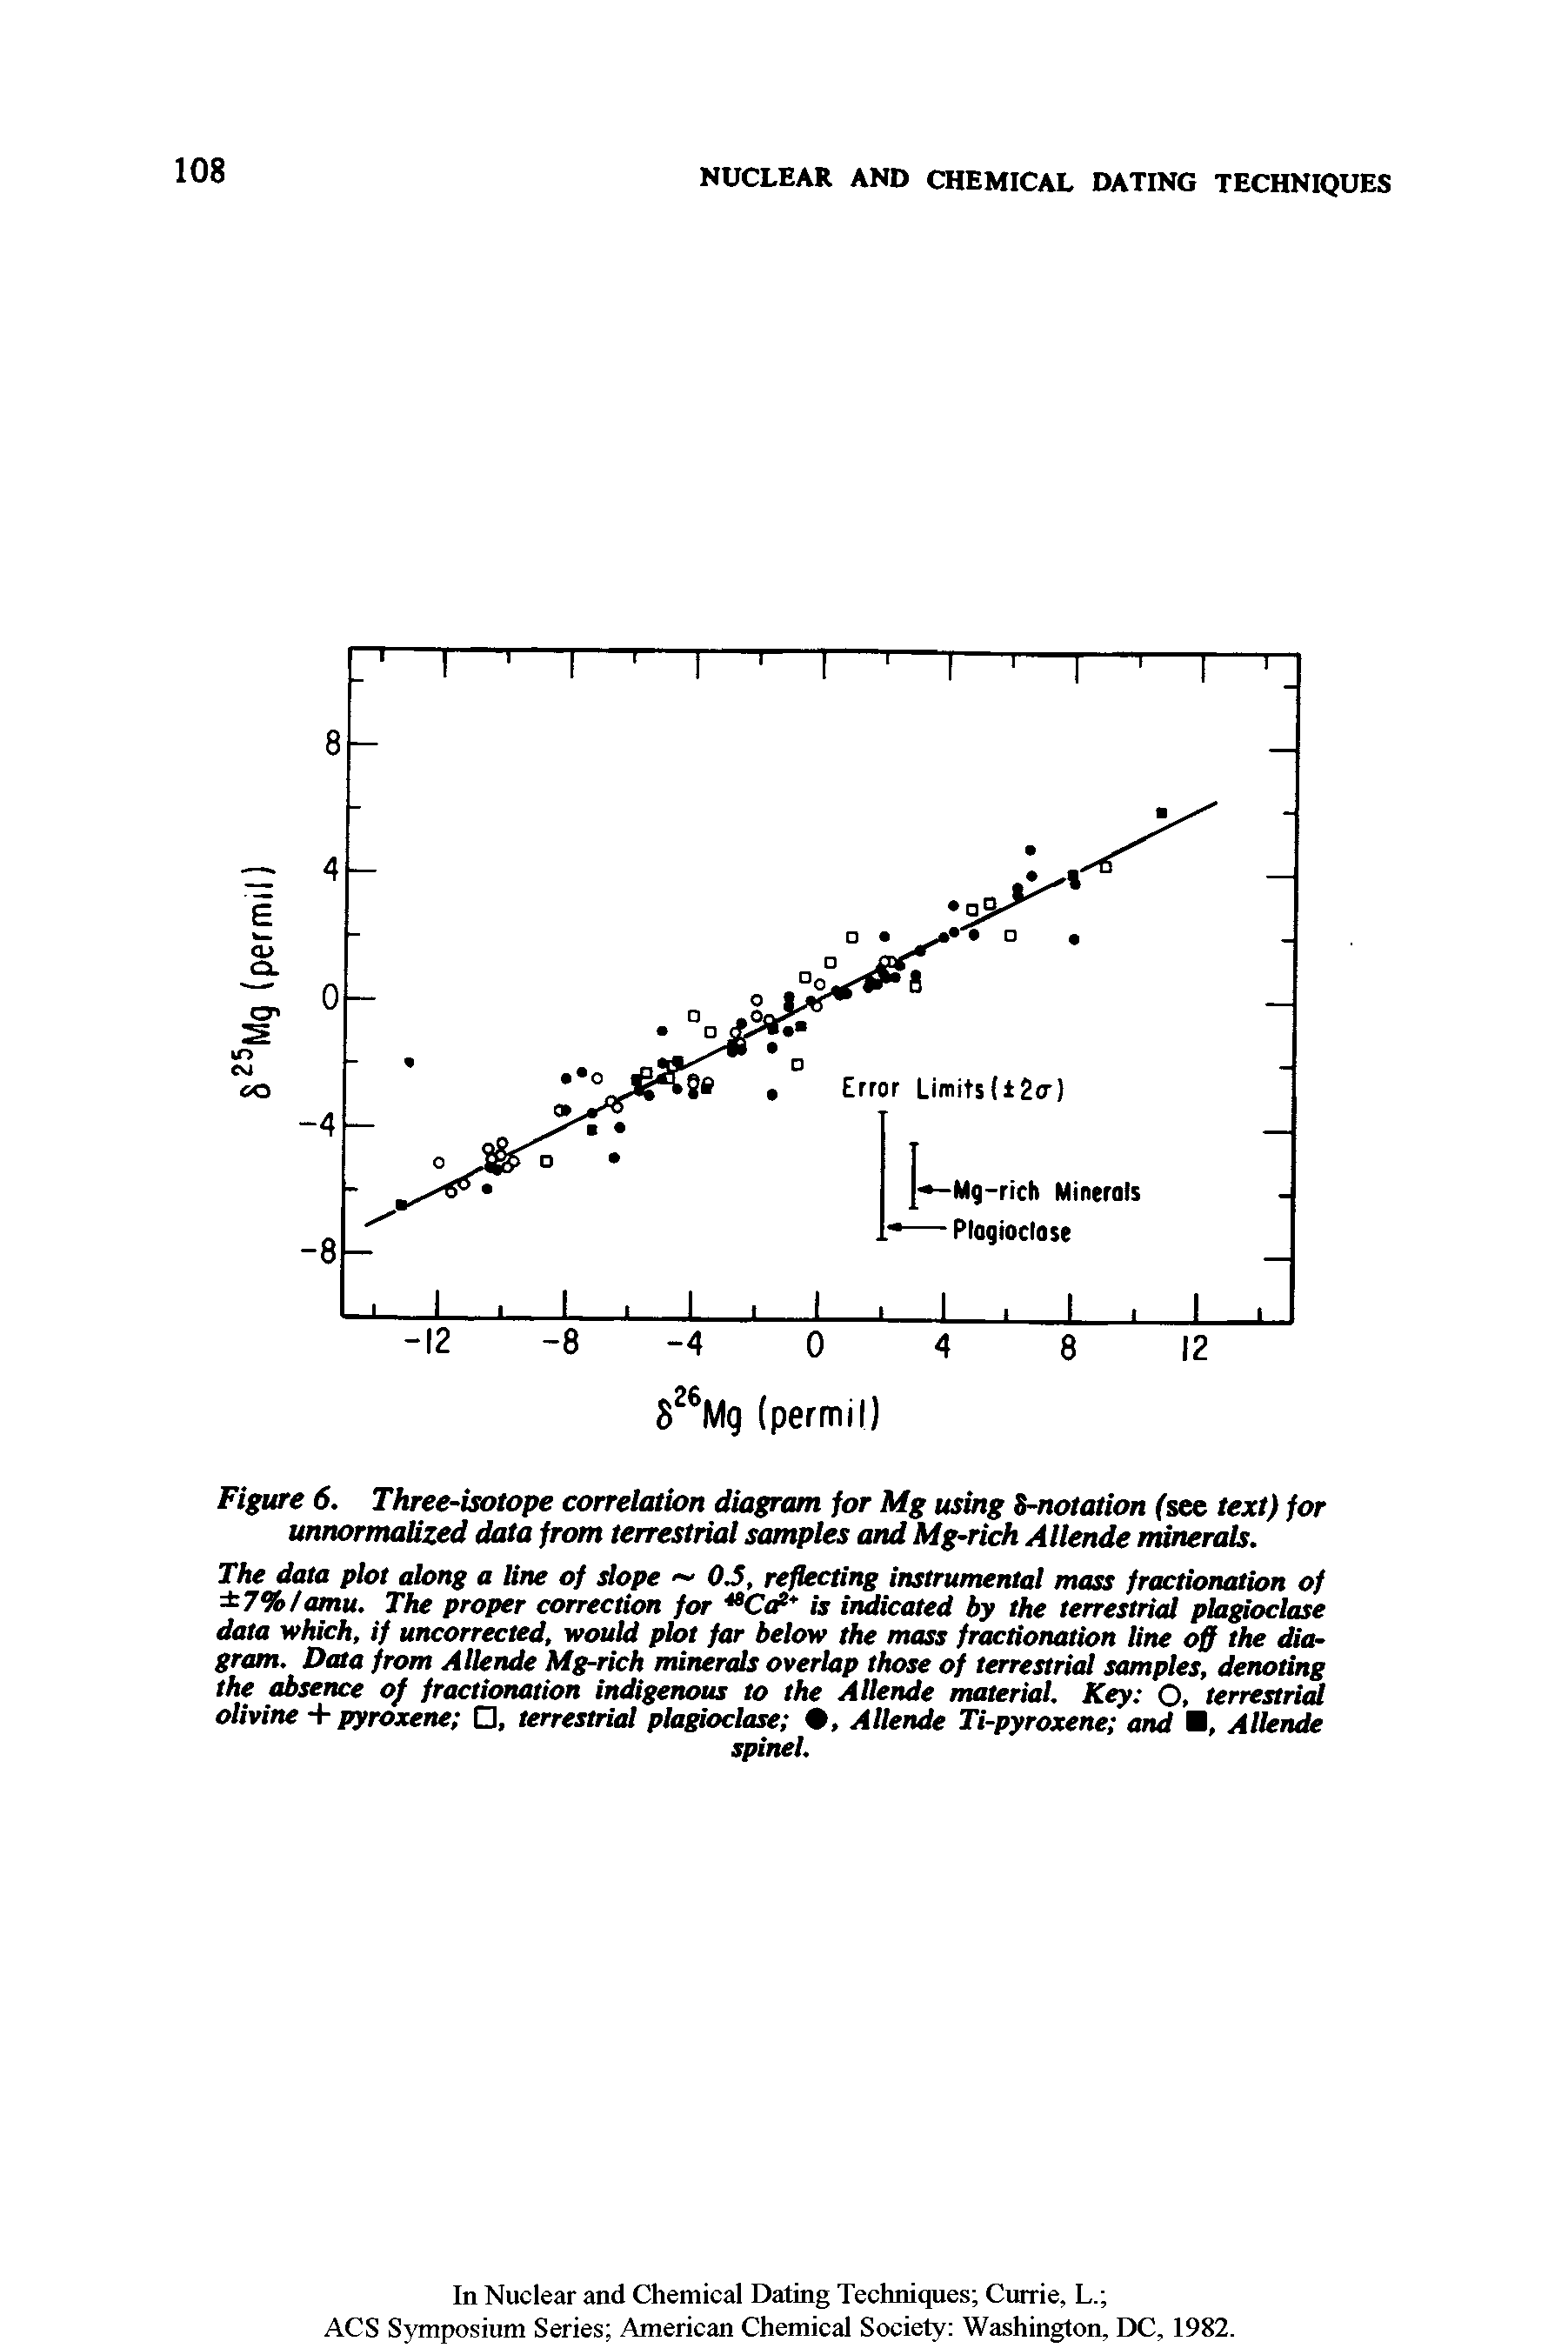 Figure 6. Three-isotope correlation diagram for Mg using S-notation fsee text) for unnormalized data from terrestrial samples and Mg-rich Allende minerals.